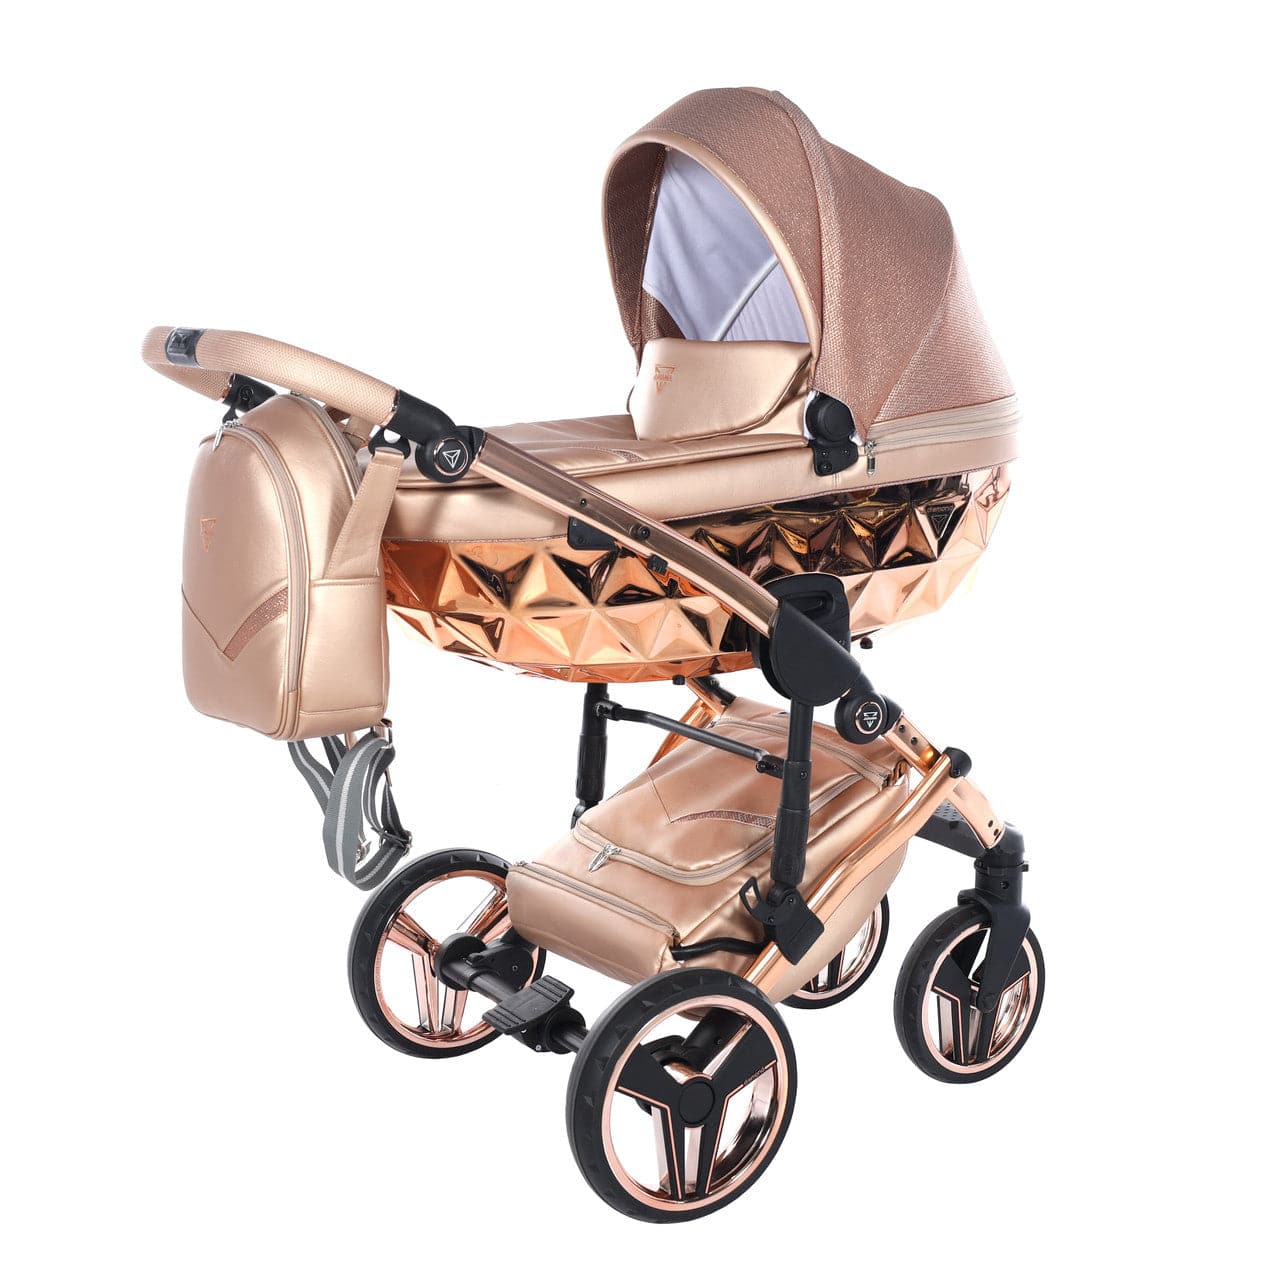 Junama Dolce 2 In 1 Pram - Rose Gold - For Your Little One